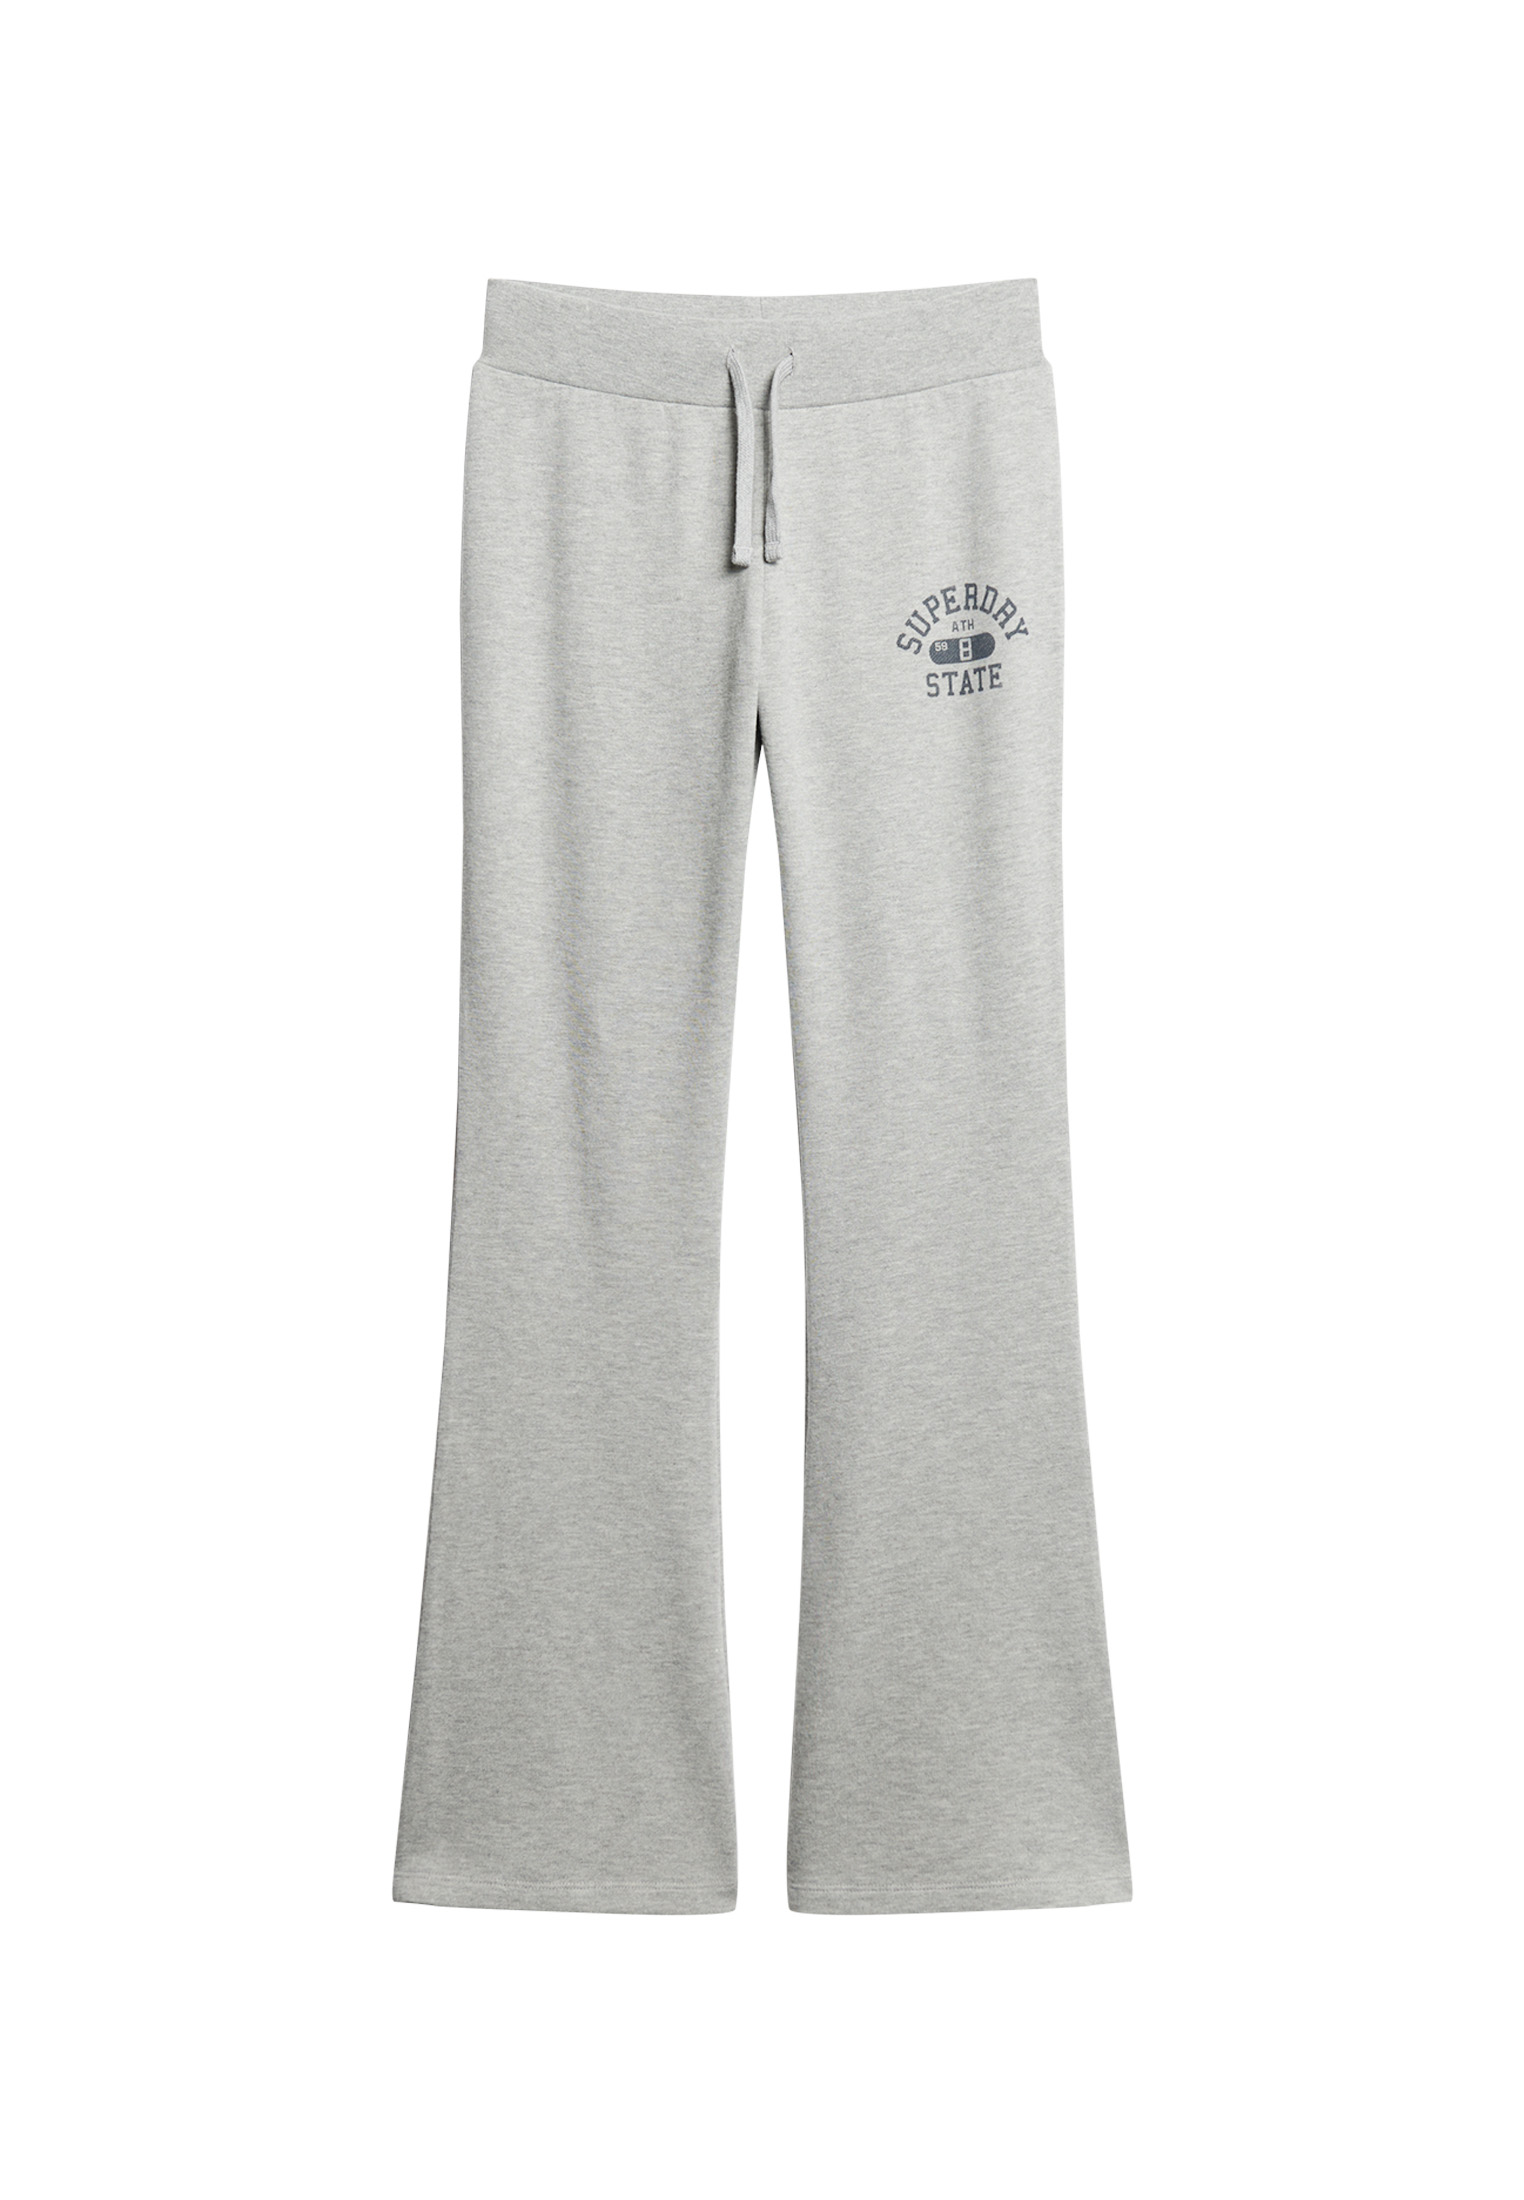 Women's Athletic Essential Jersey Flare Joggers in Blueberry Navy